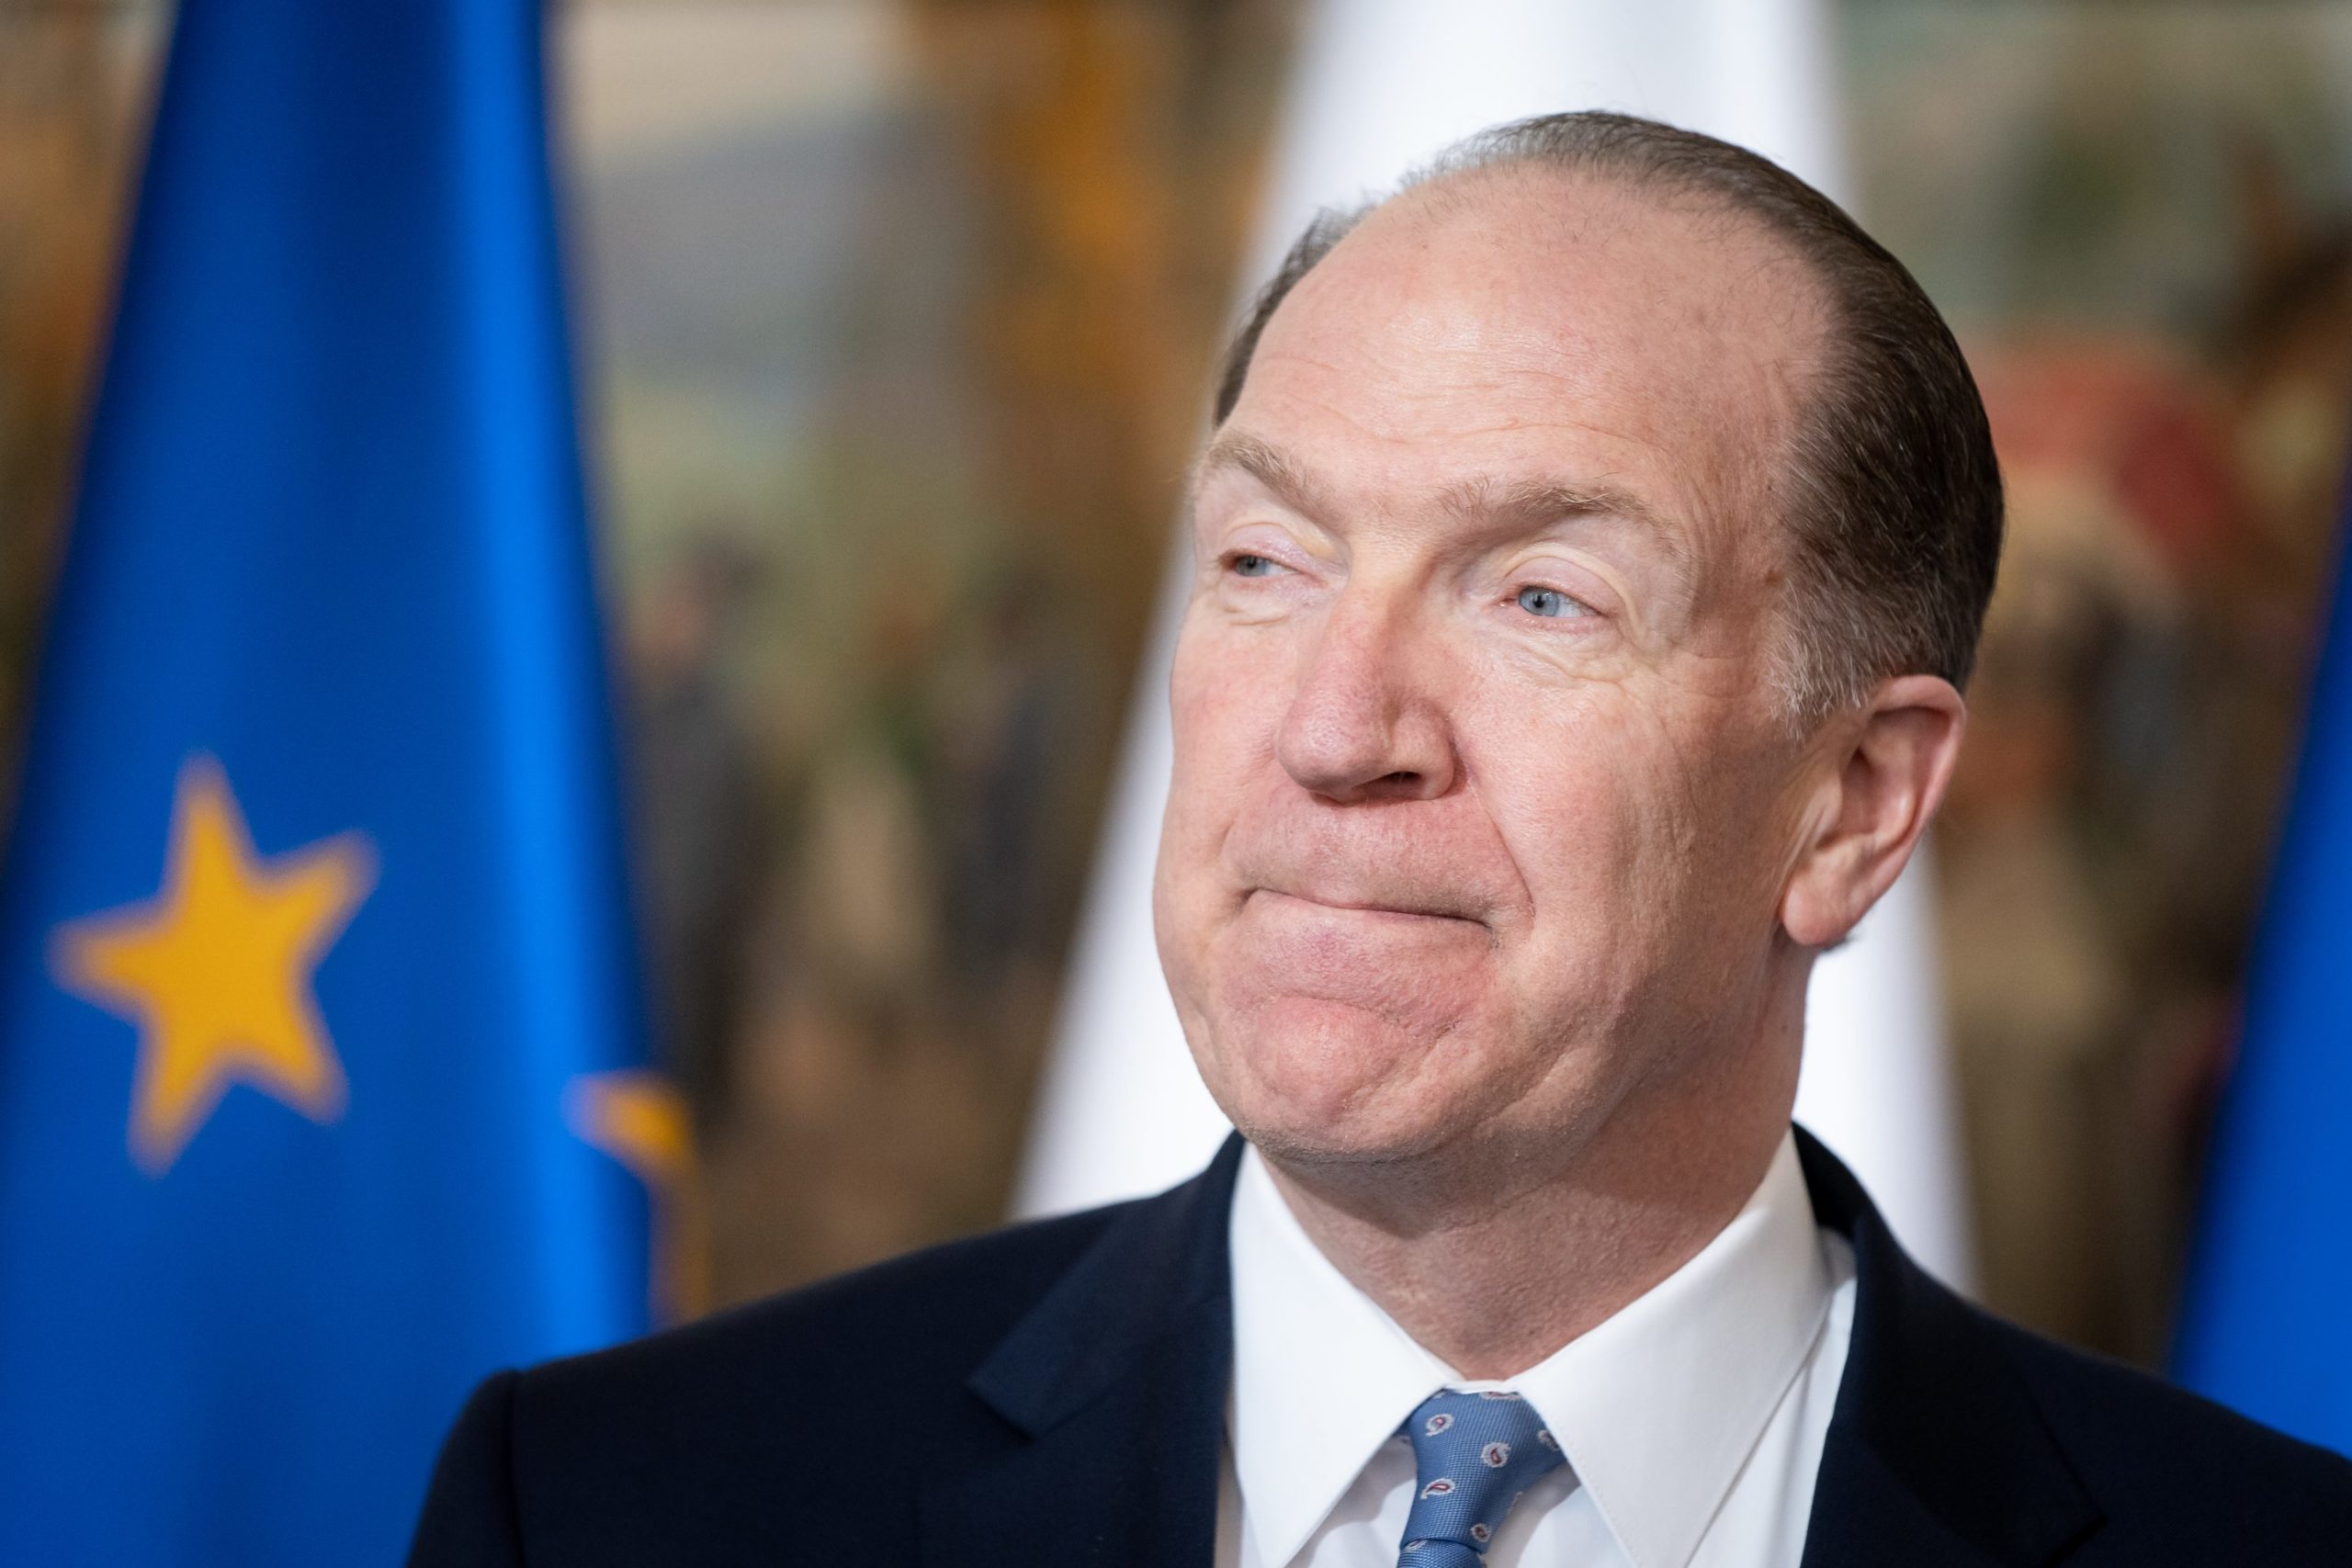 Inflation may take years to get under control, says World Bank's Malpass